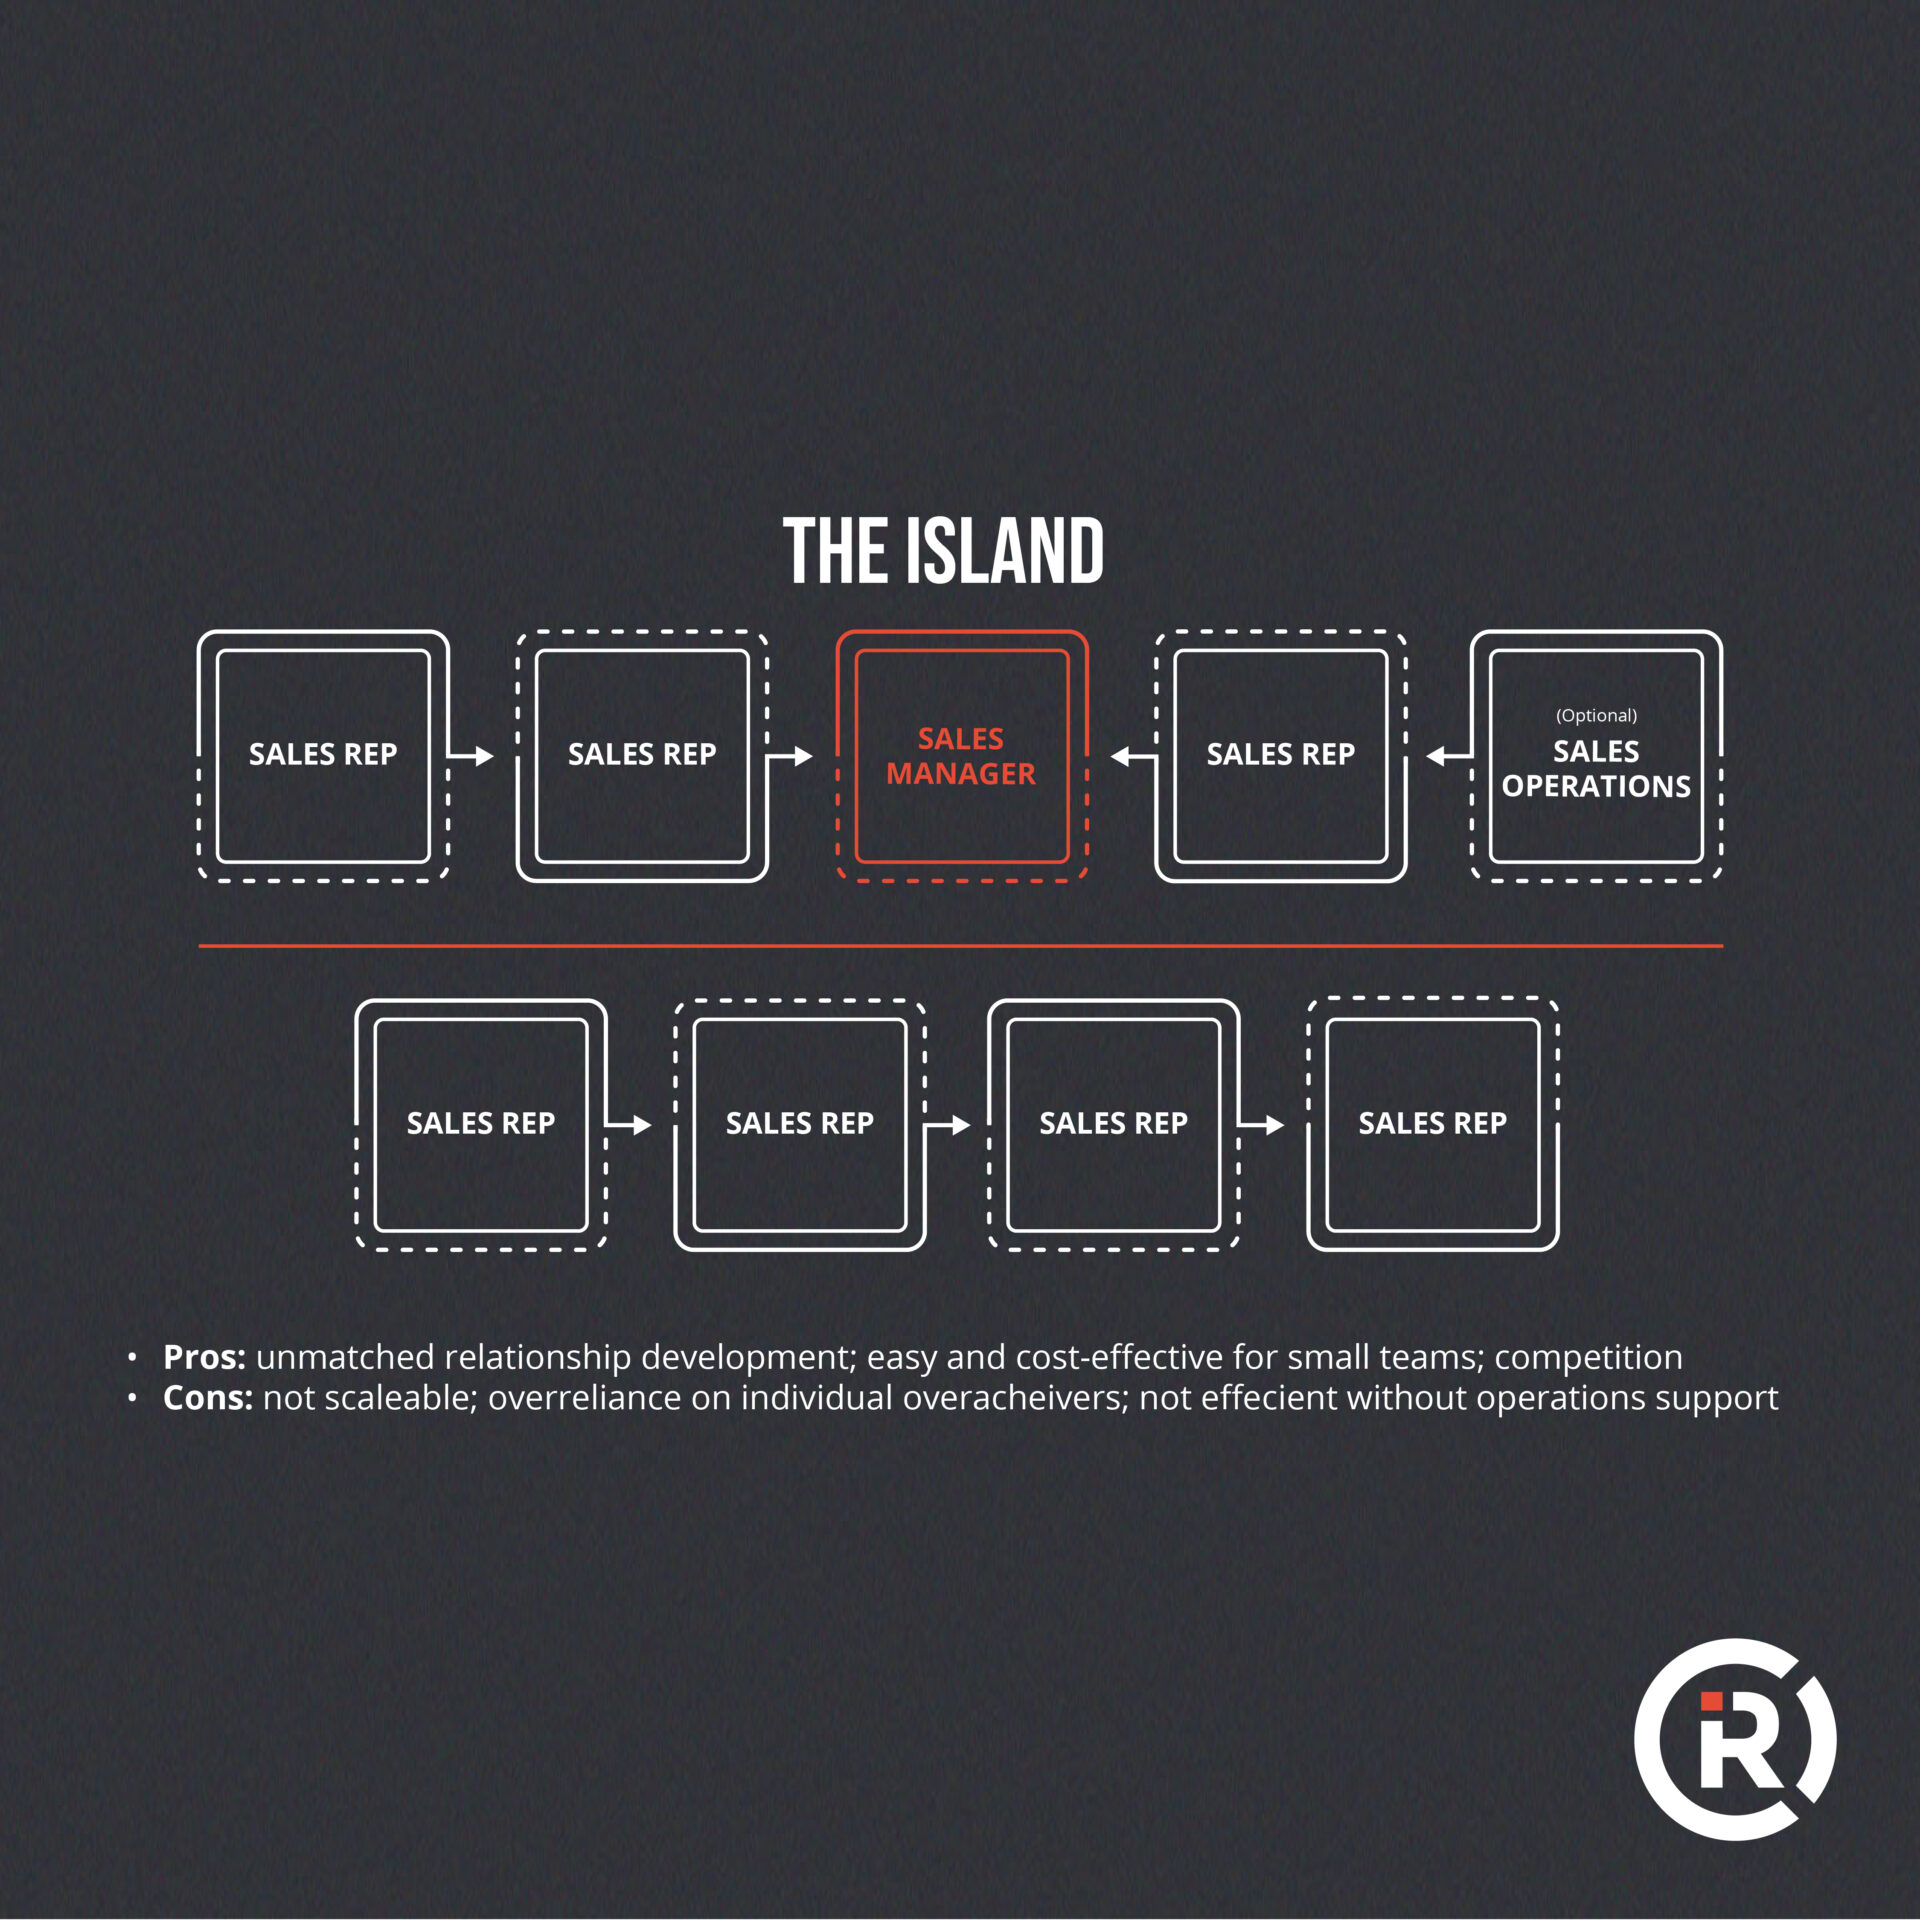 Chart detailing the island sales structure method